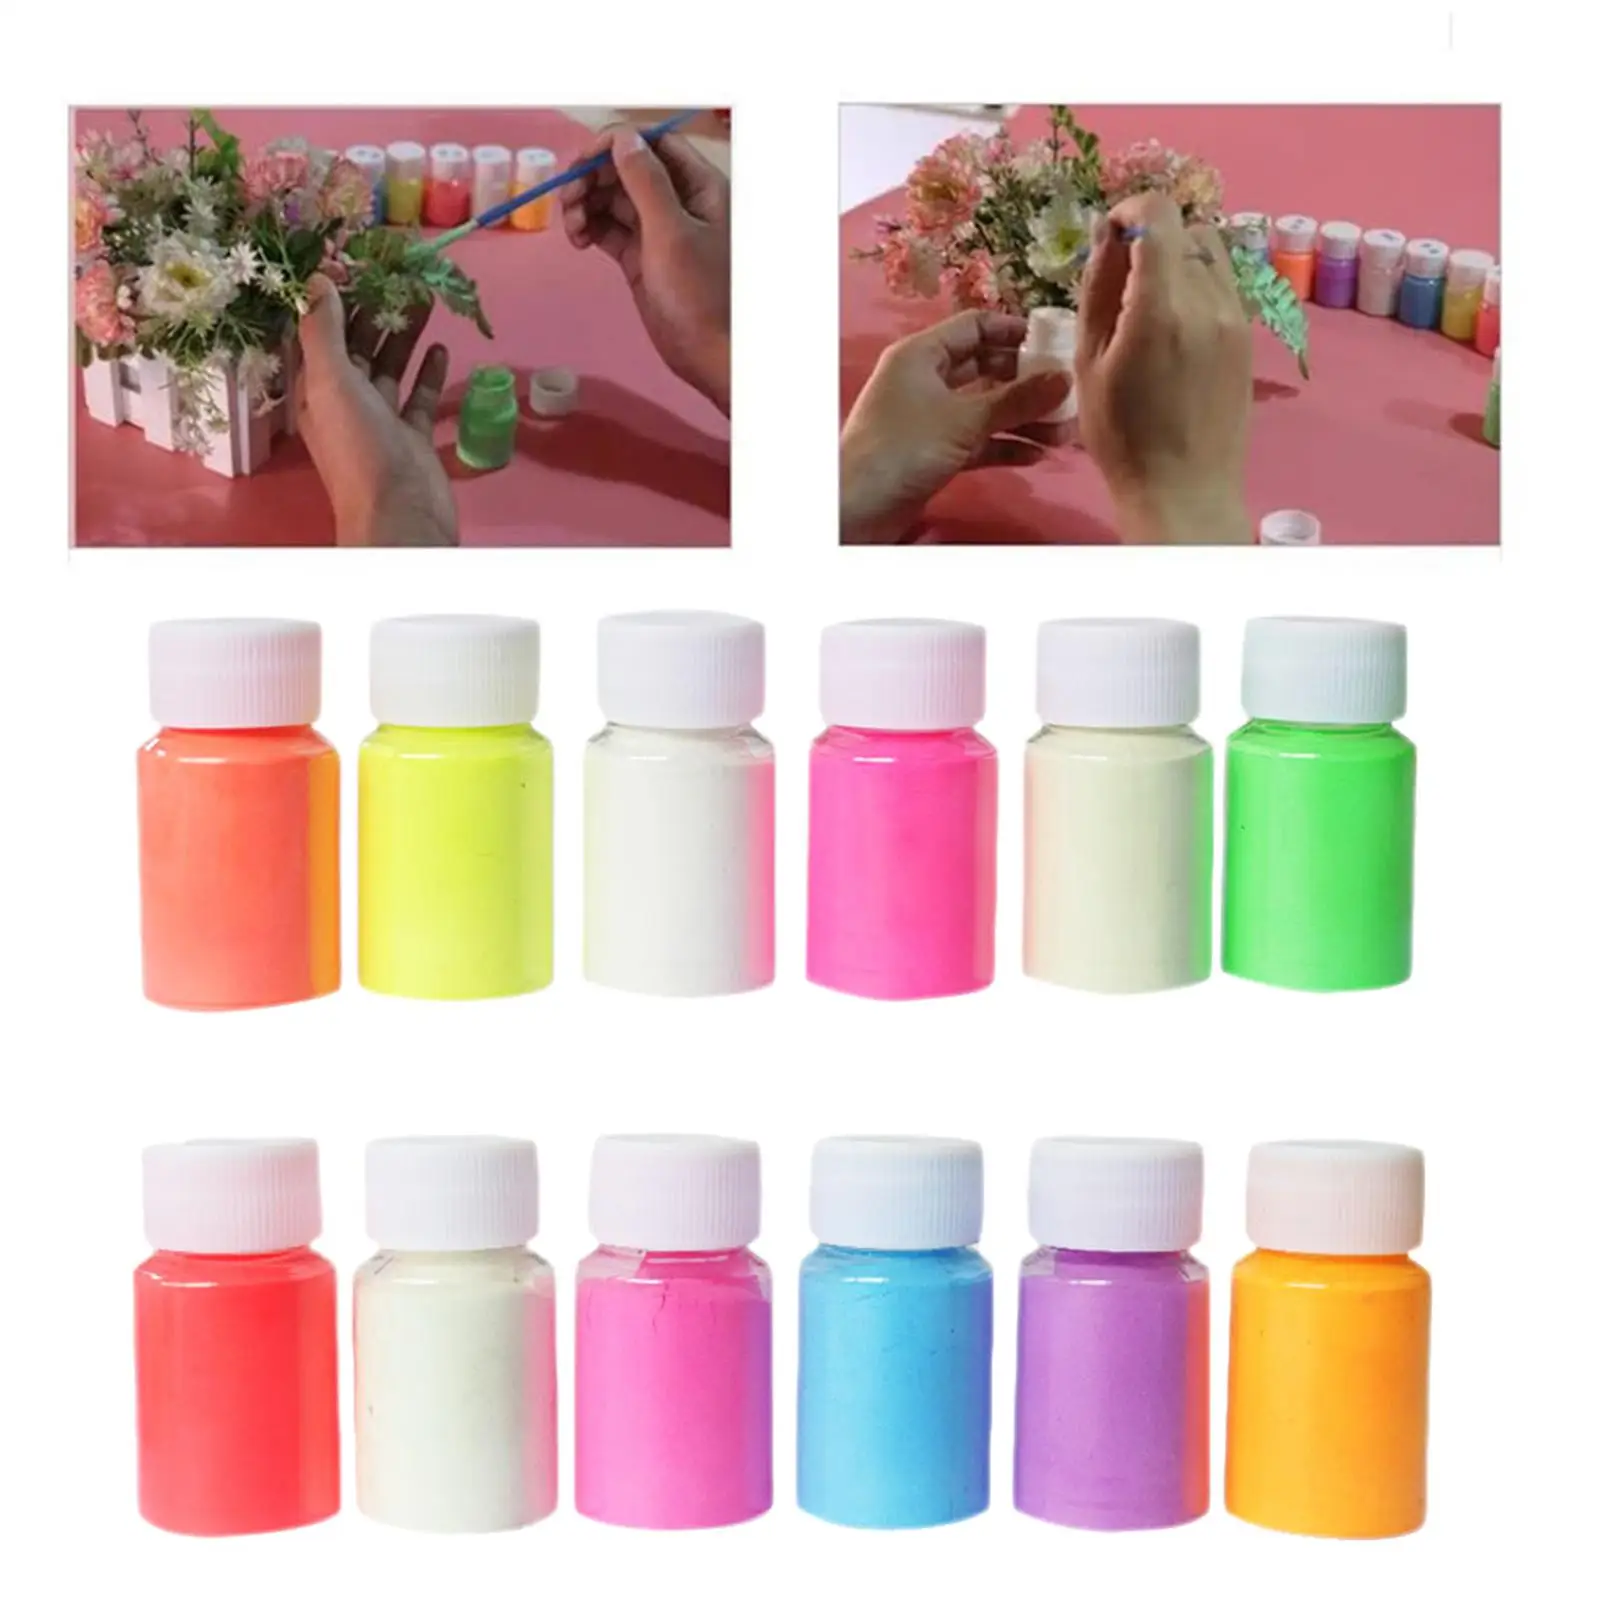 12 Colors  The Dark Pigment , Luminous  Non for Epoxy Resin ,Acrylic Paint,Resin Crafts